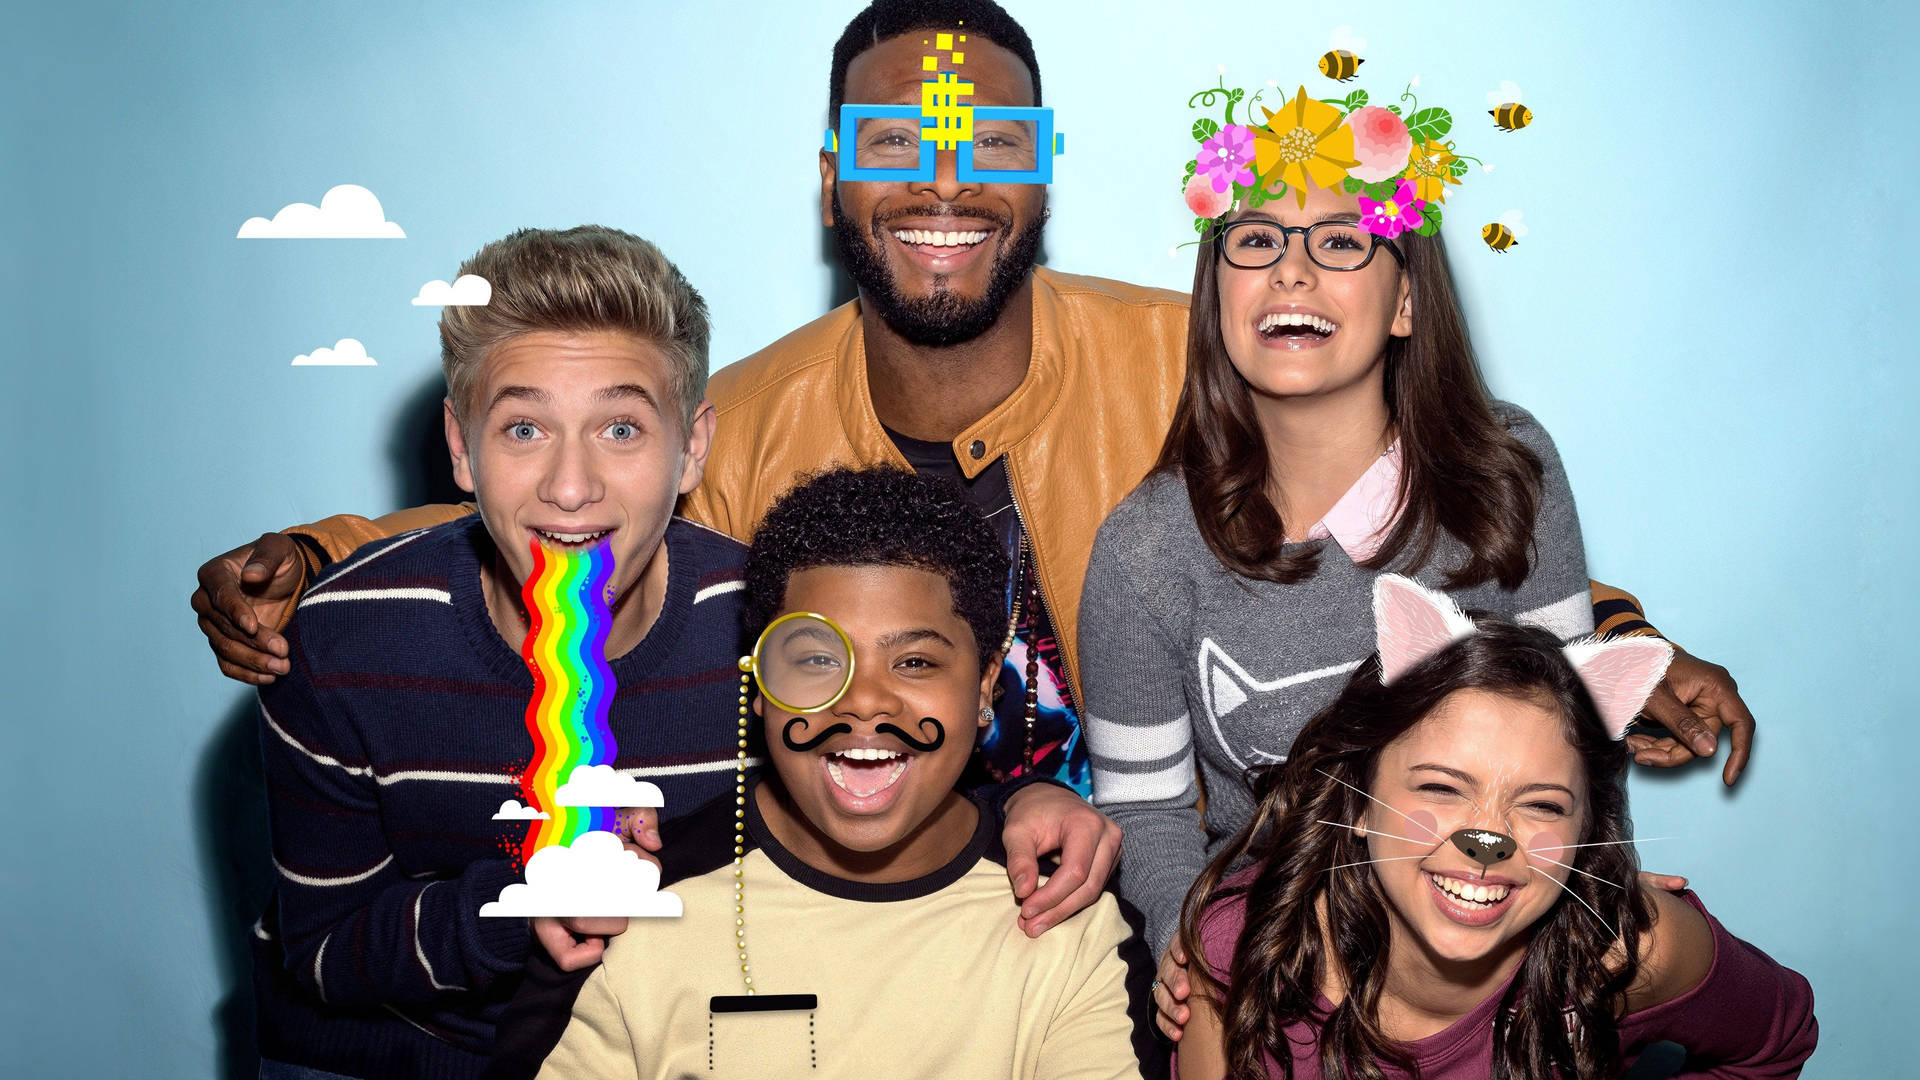 Game Shakers With Funny Filter Effects Background